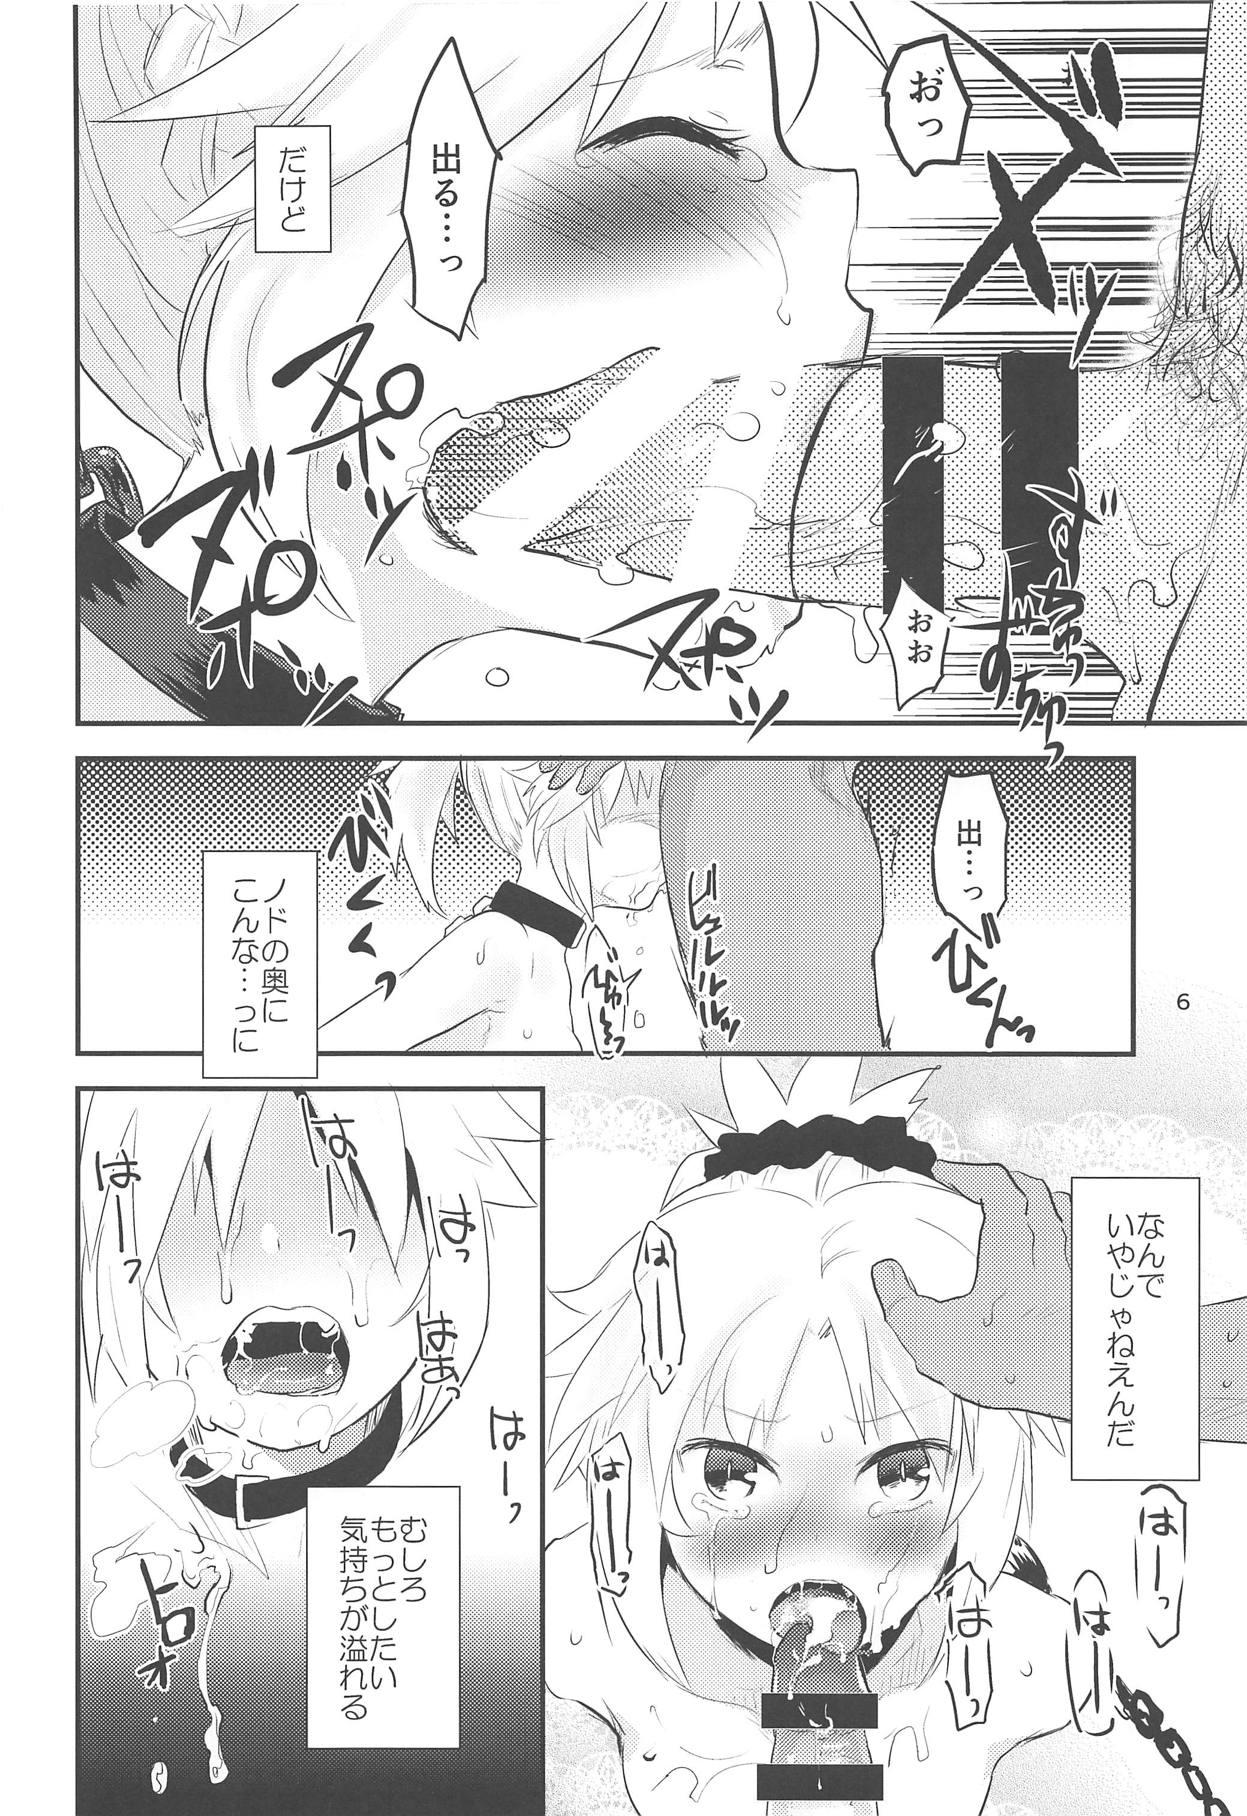 Amadora Erotic to Knight - Fate grand order Shower - Page 5